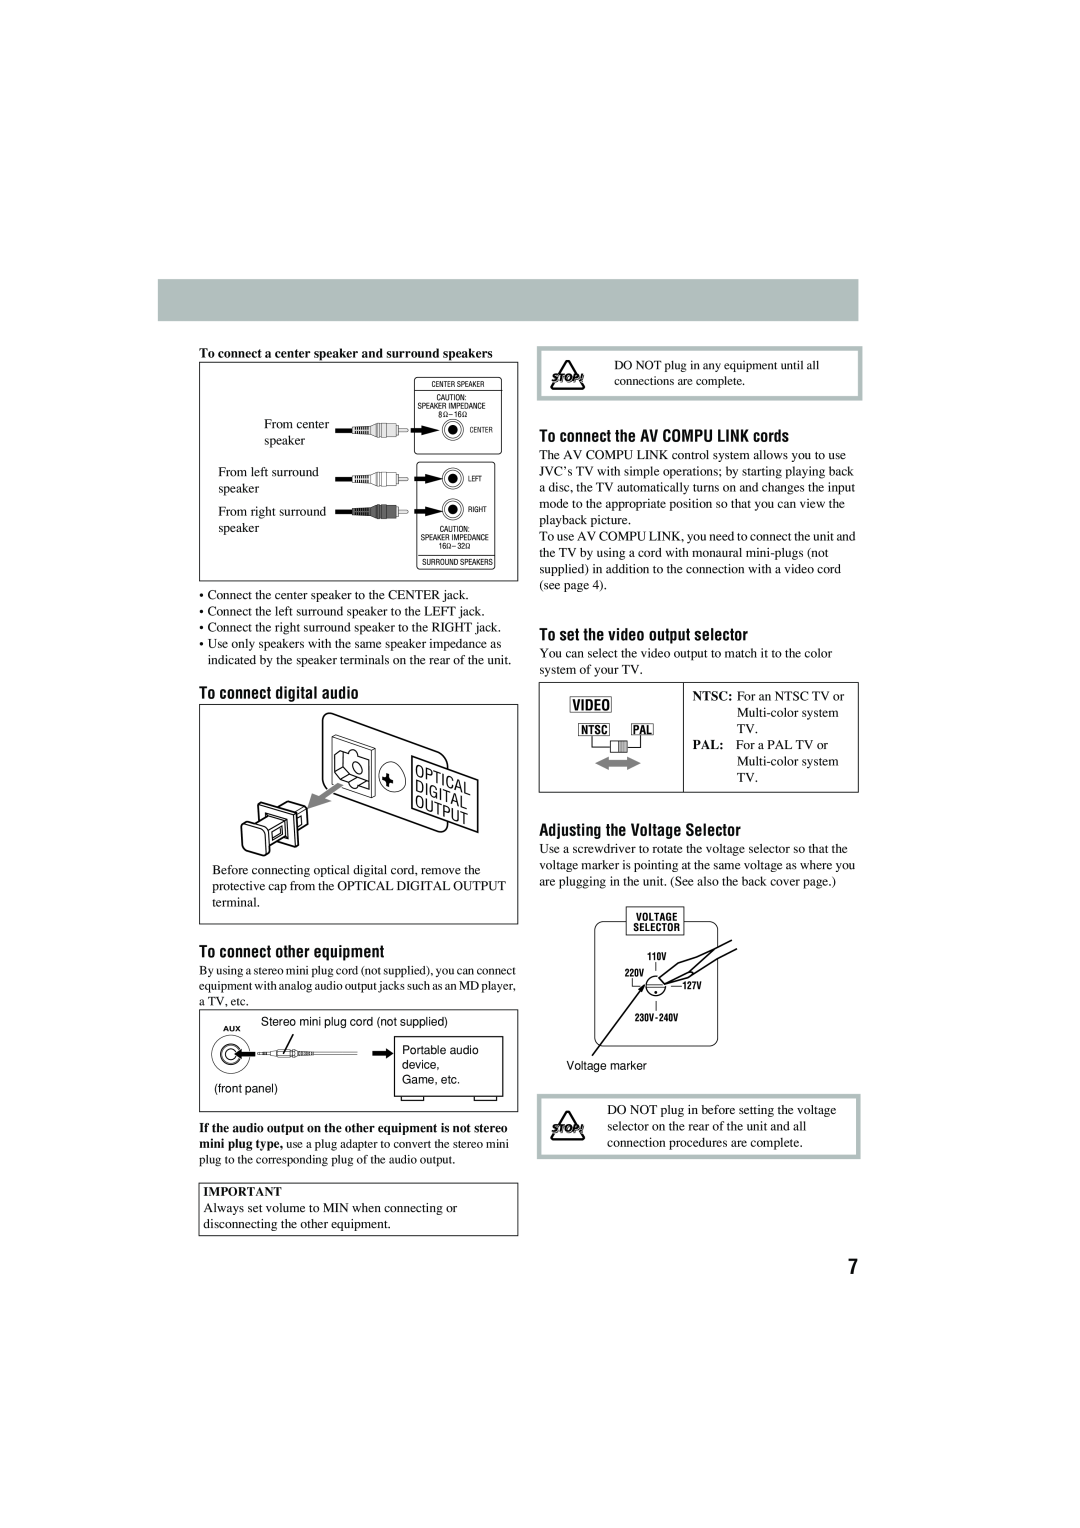 JVC CA-MXJD5 manual To connect digital audio, To connect the AV COMPU LINK cords, To set the video output selector 